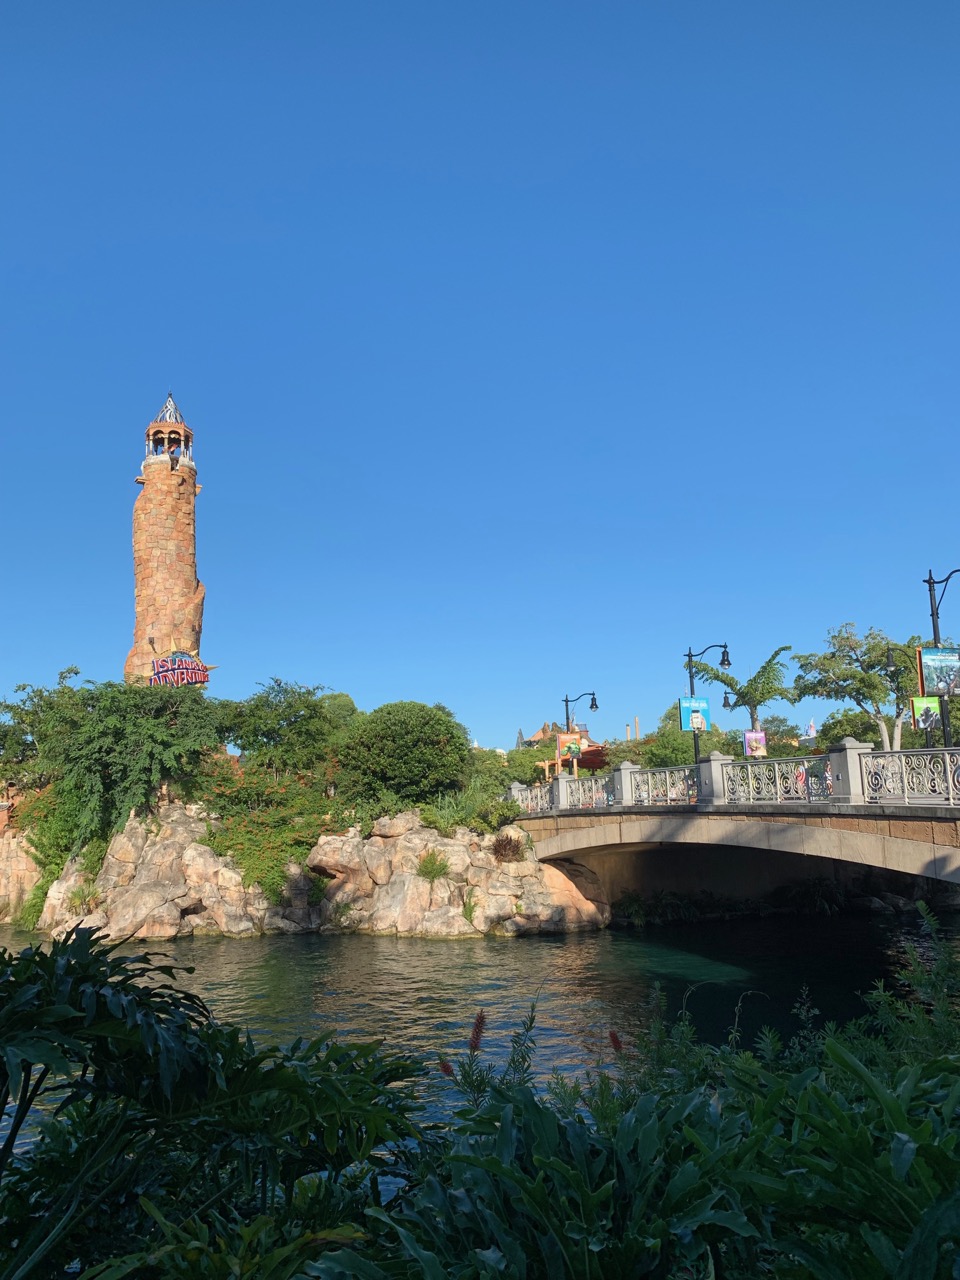 Islands of Adventure One-Day Plan for Parents with Small Children